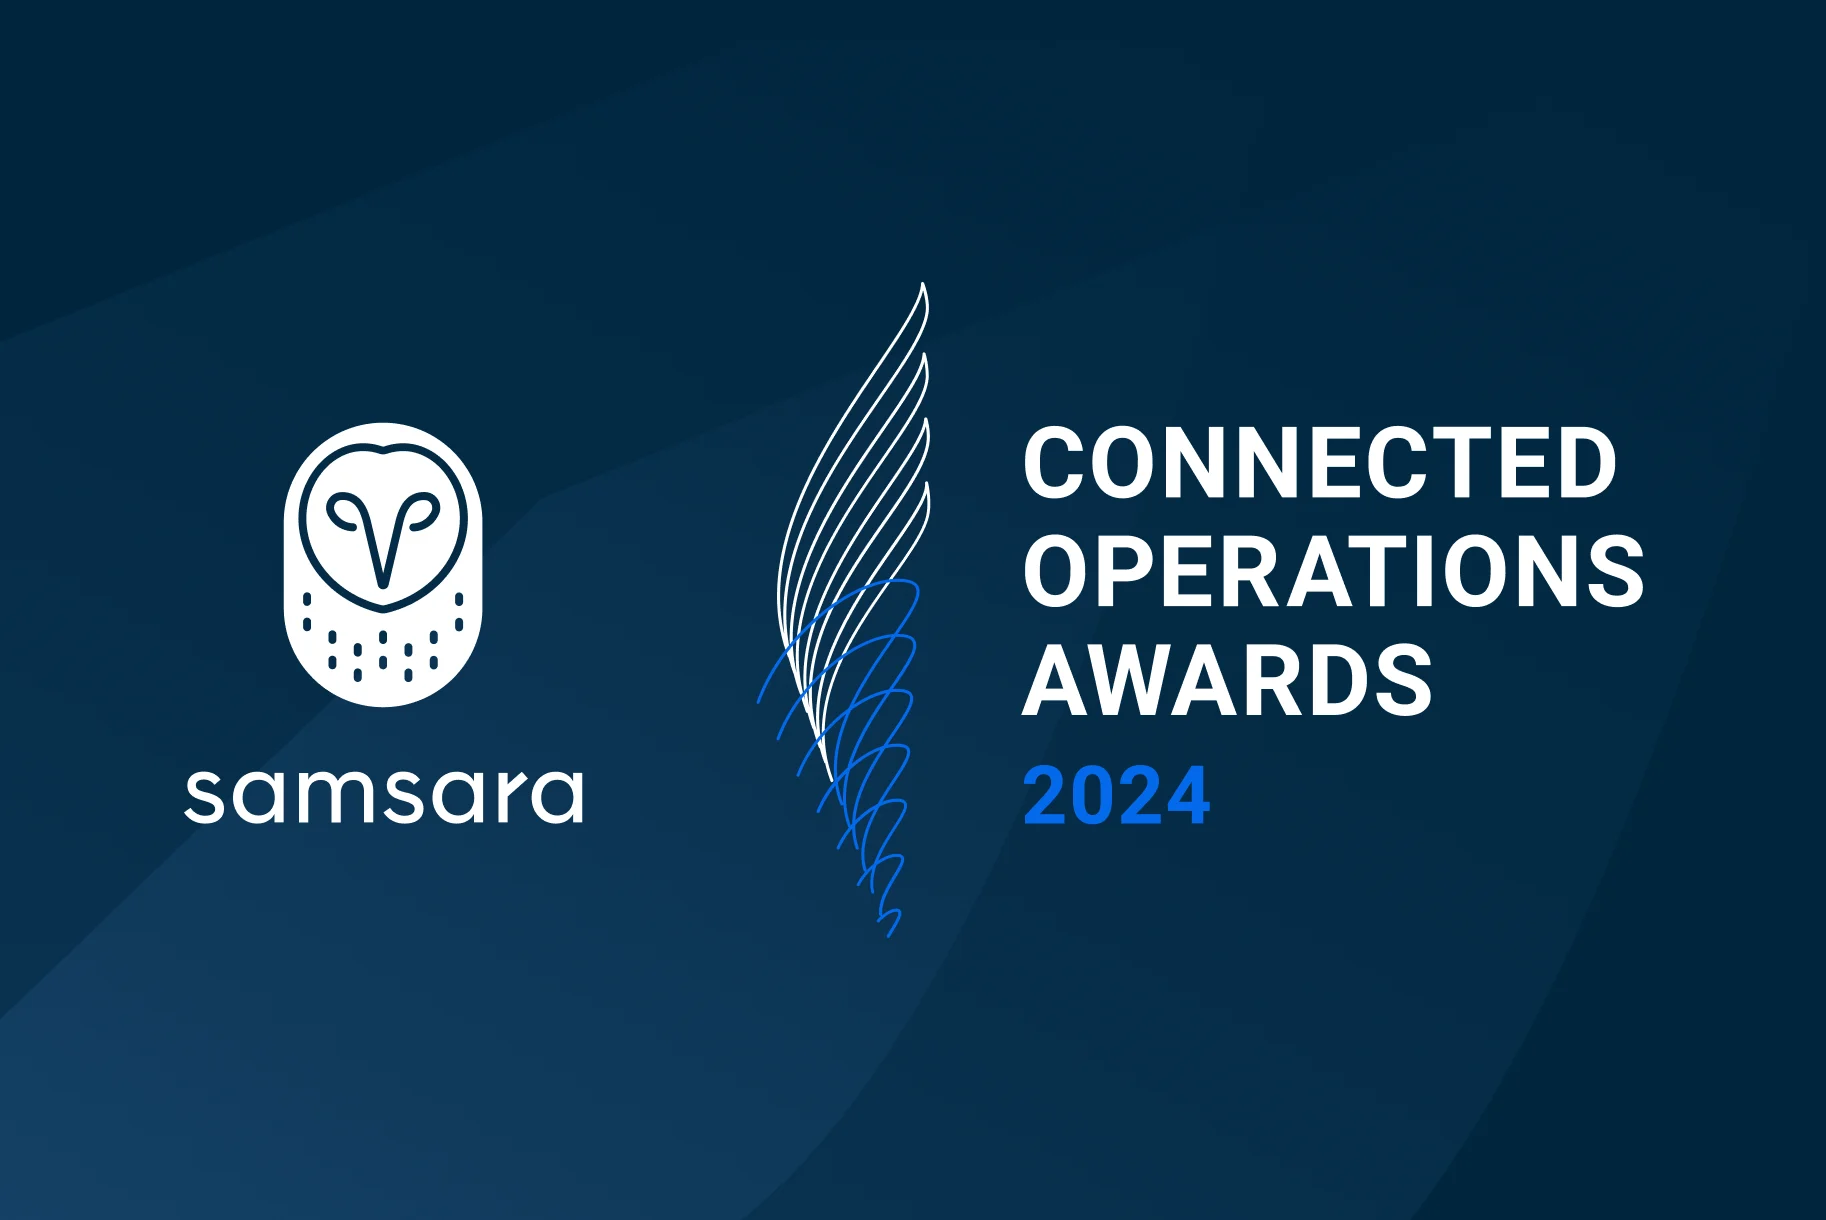 Announcing the 2024 Connected Operations Awards Winners